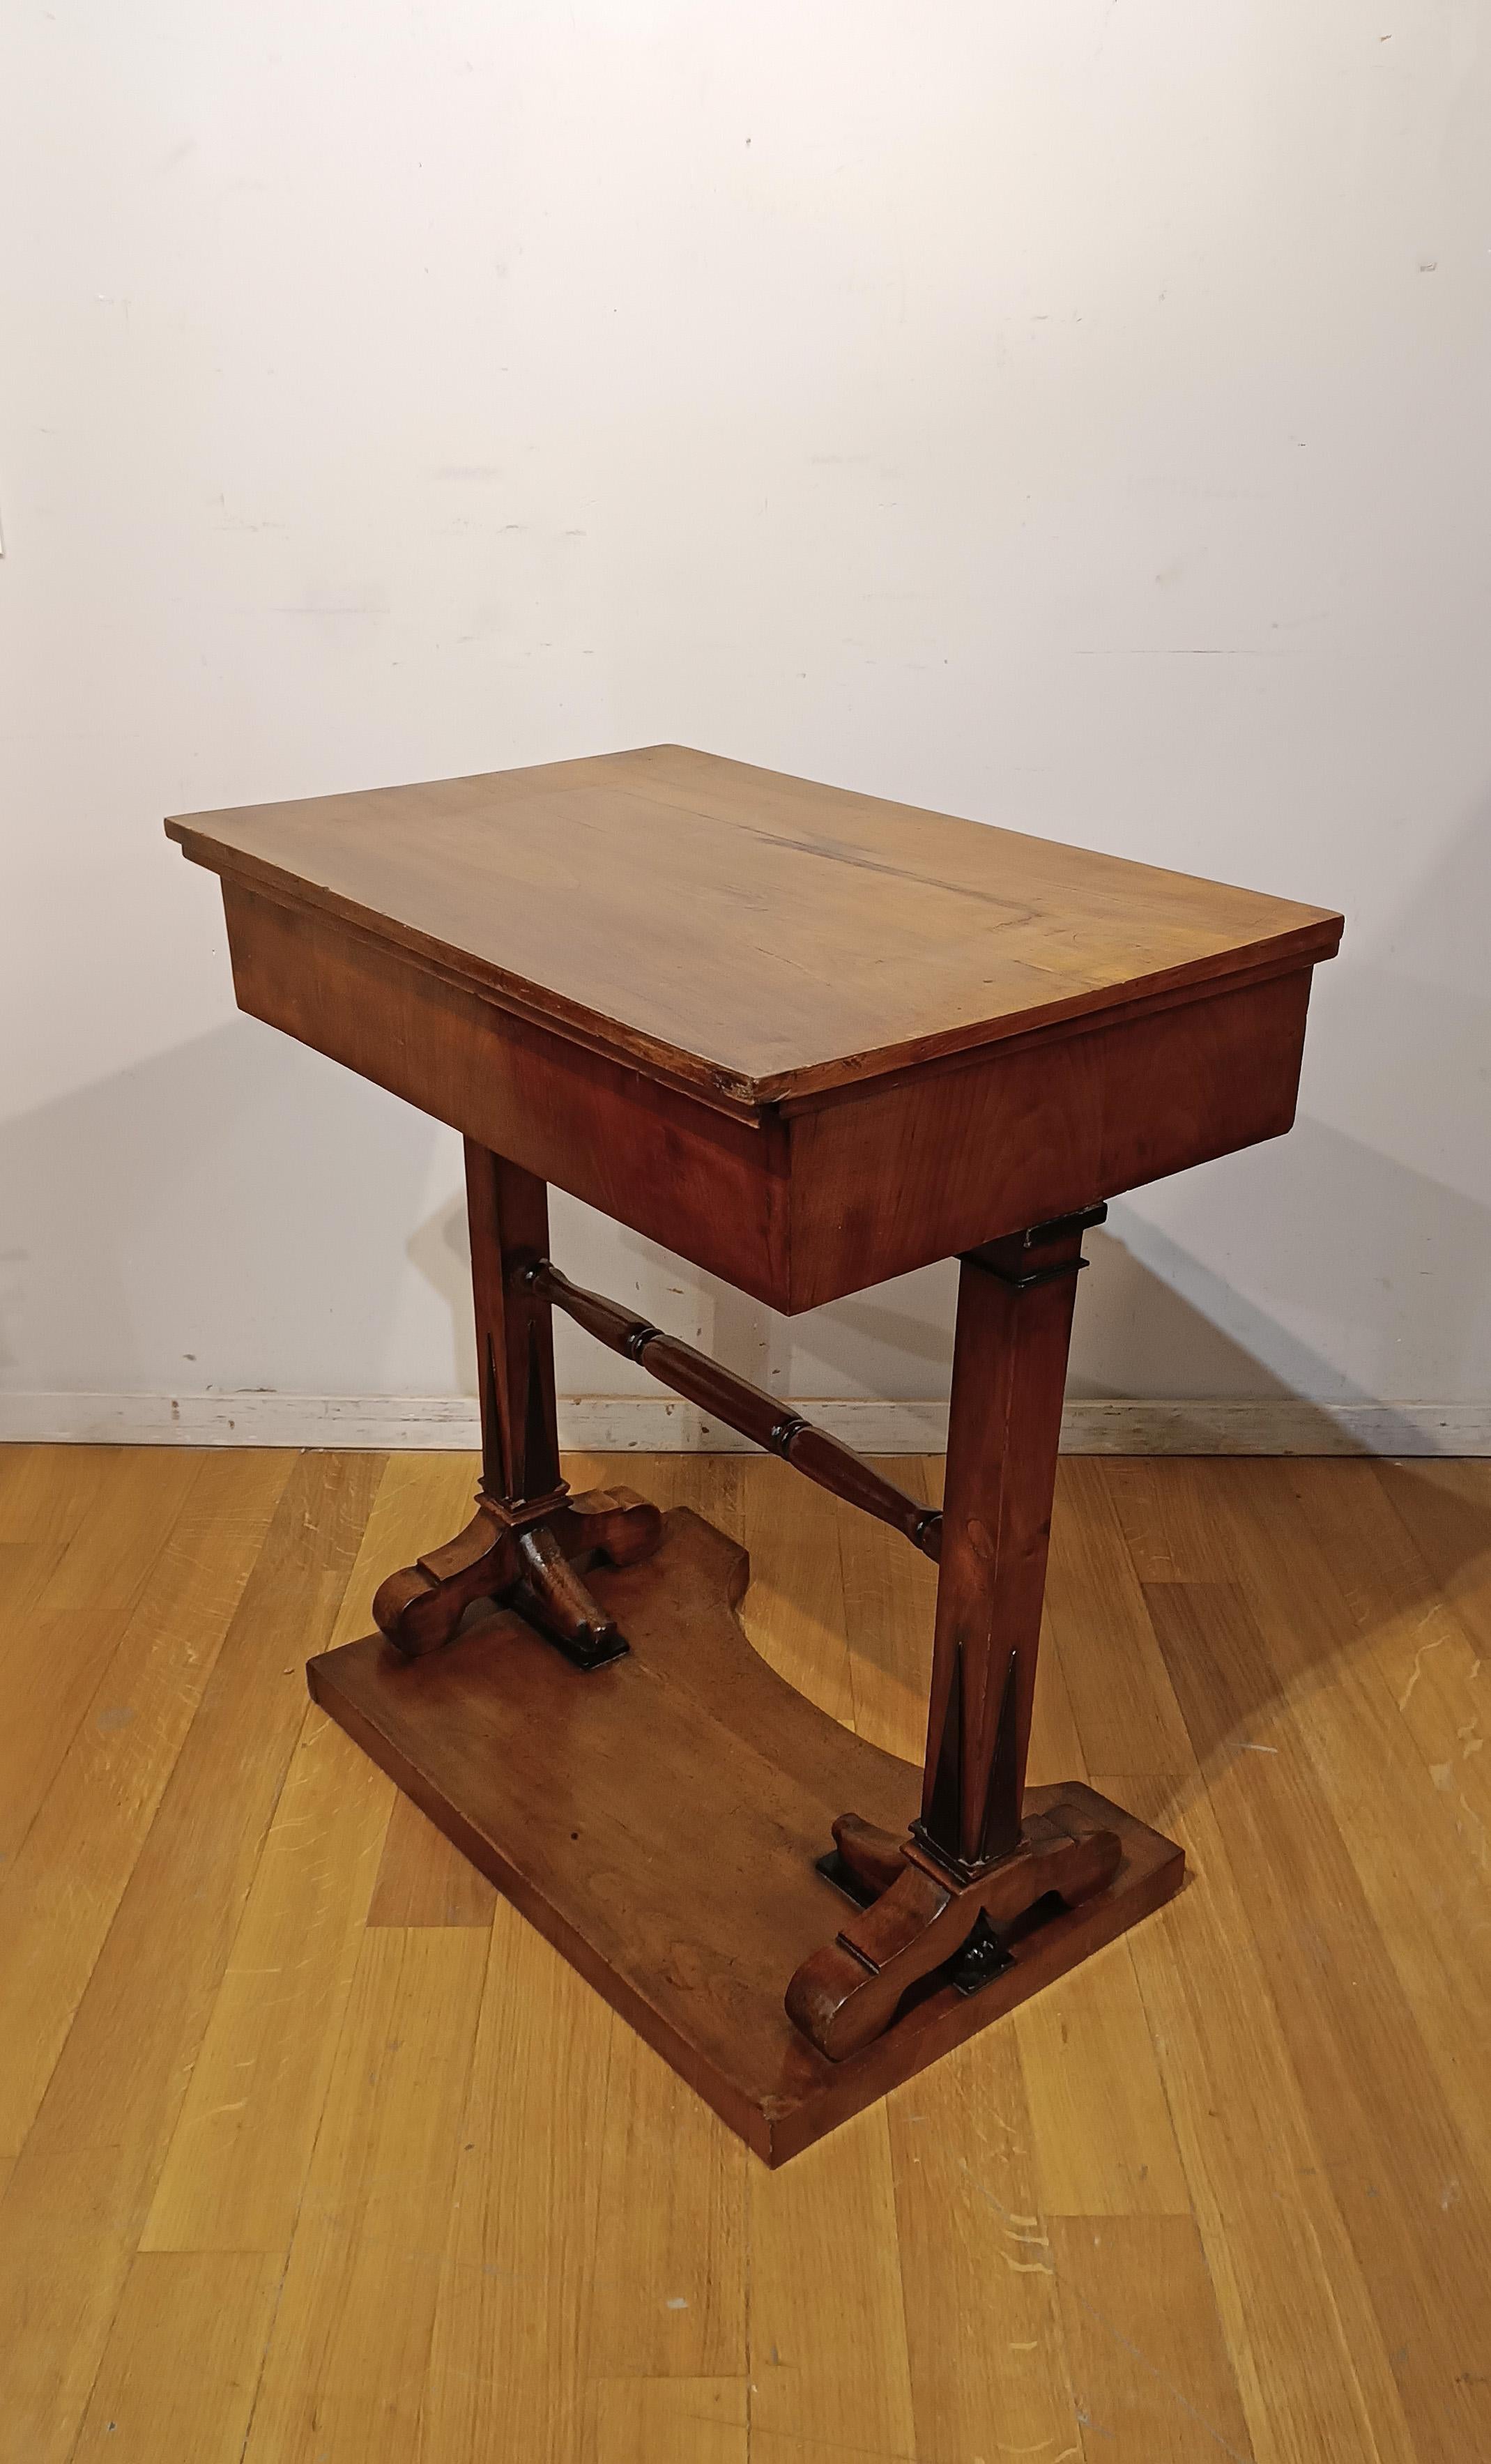 19th Century EARLY 19th CENTURY SMALL WORKING TABLE For Sale